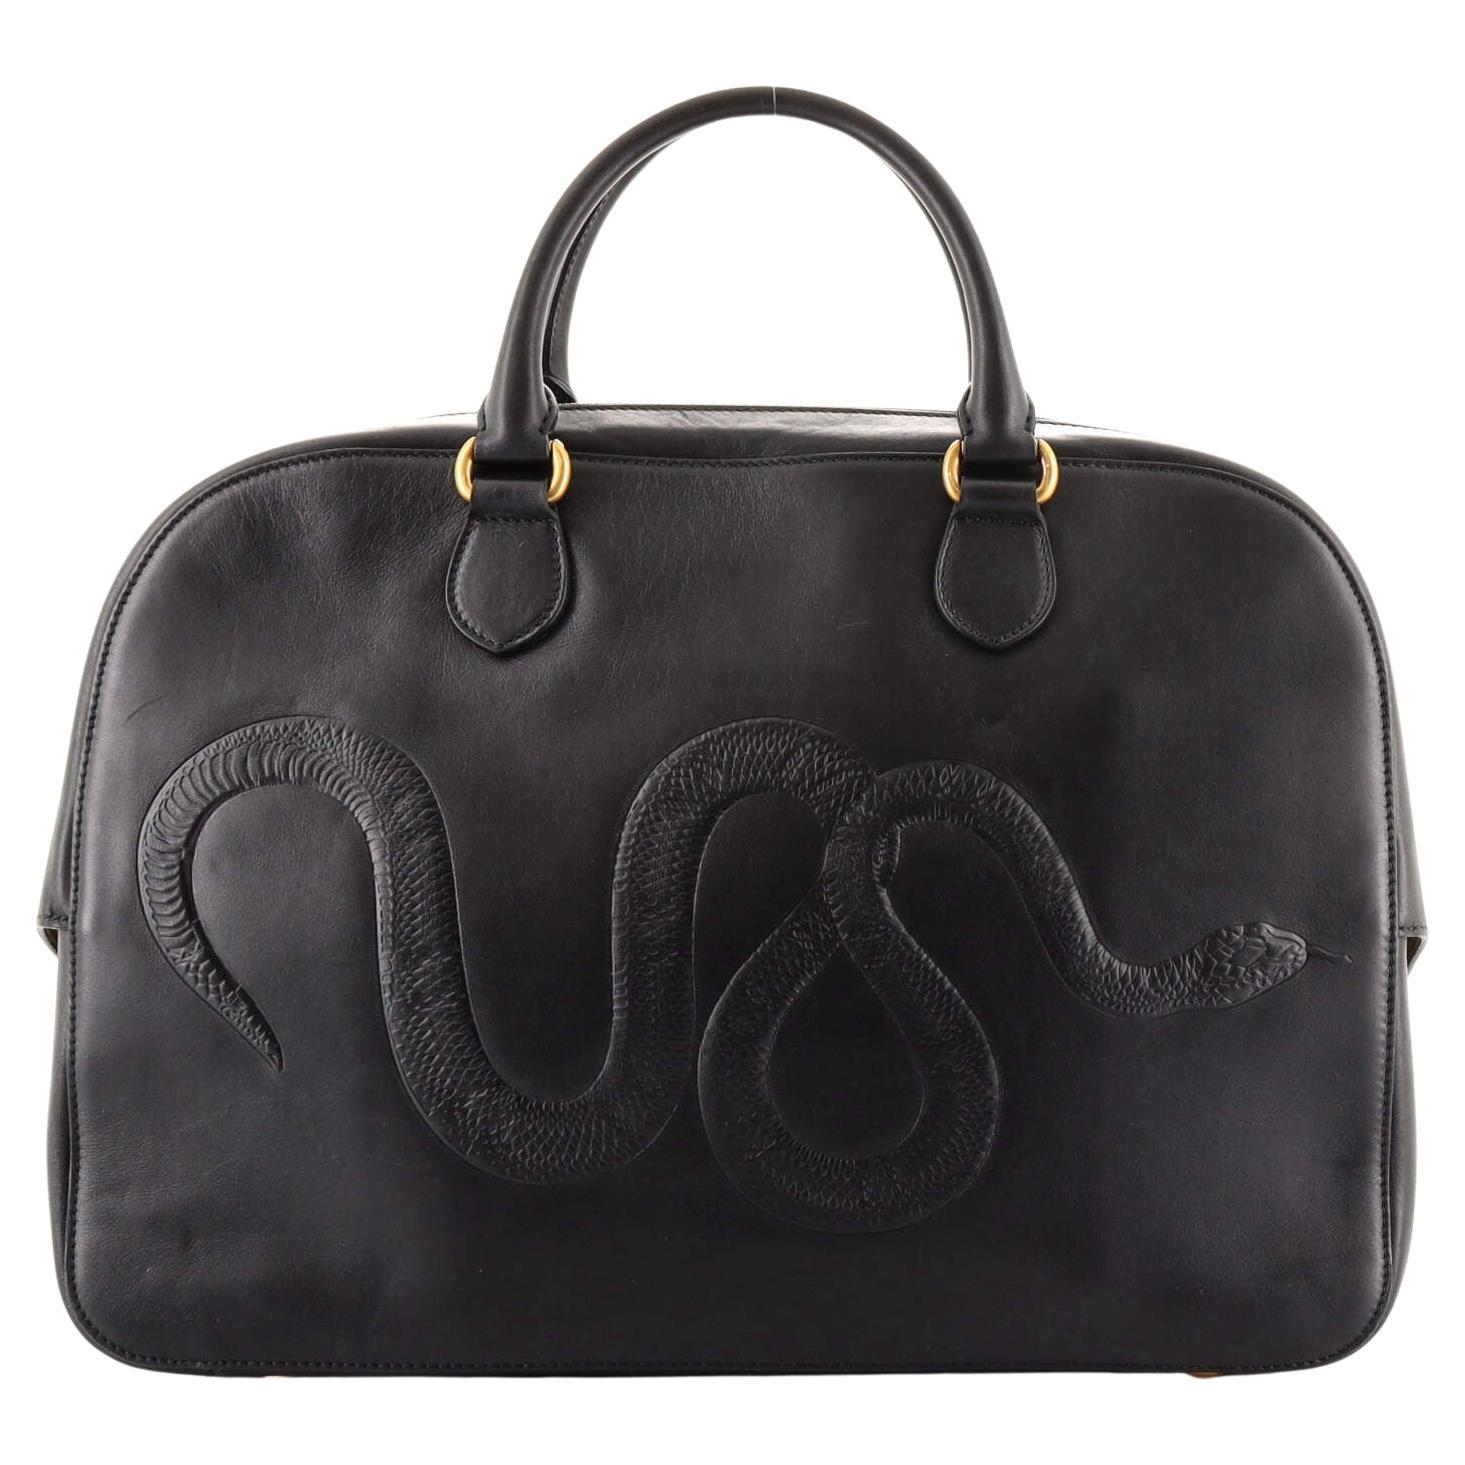 Gucci Animal Duffle Bag Embossed Leather Large